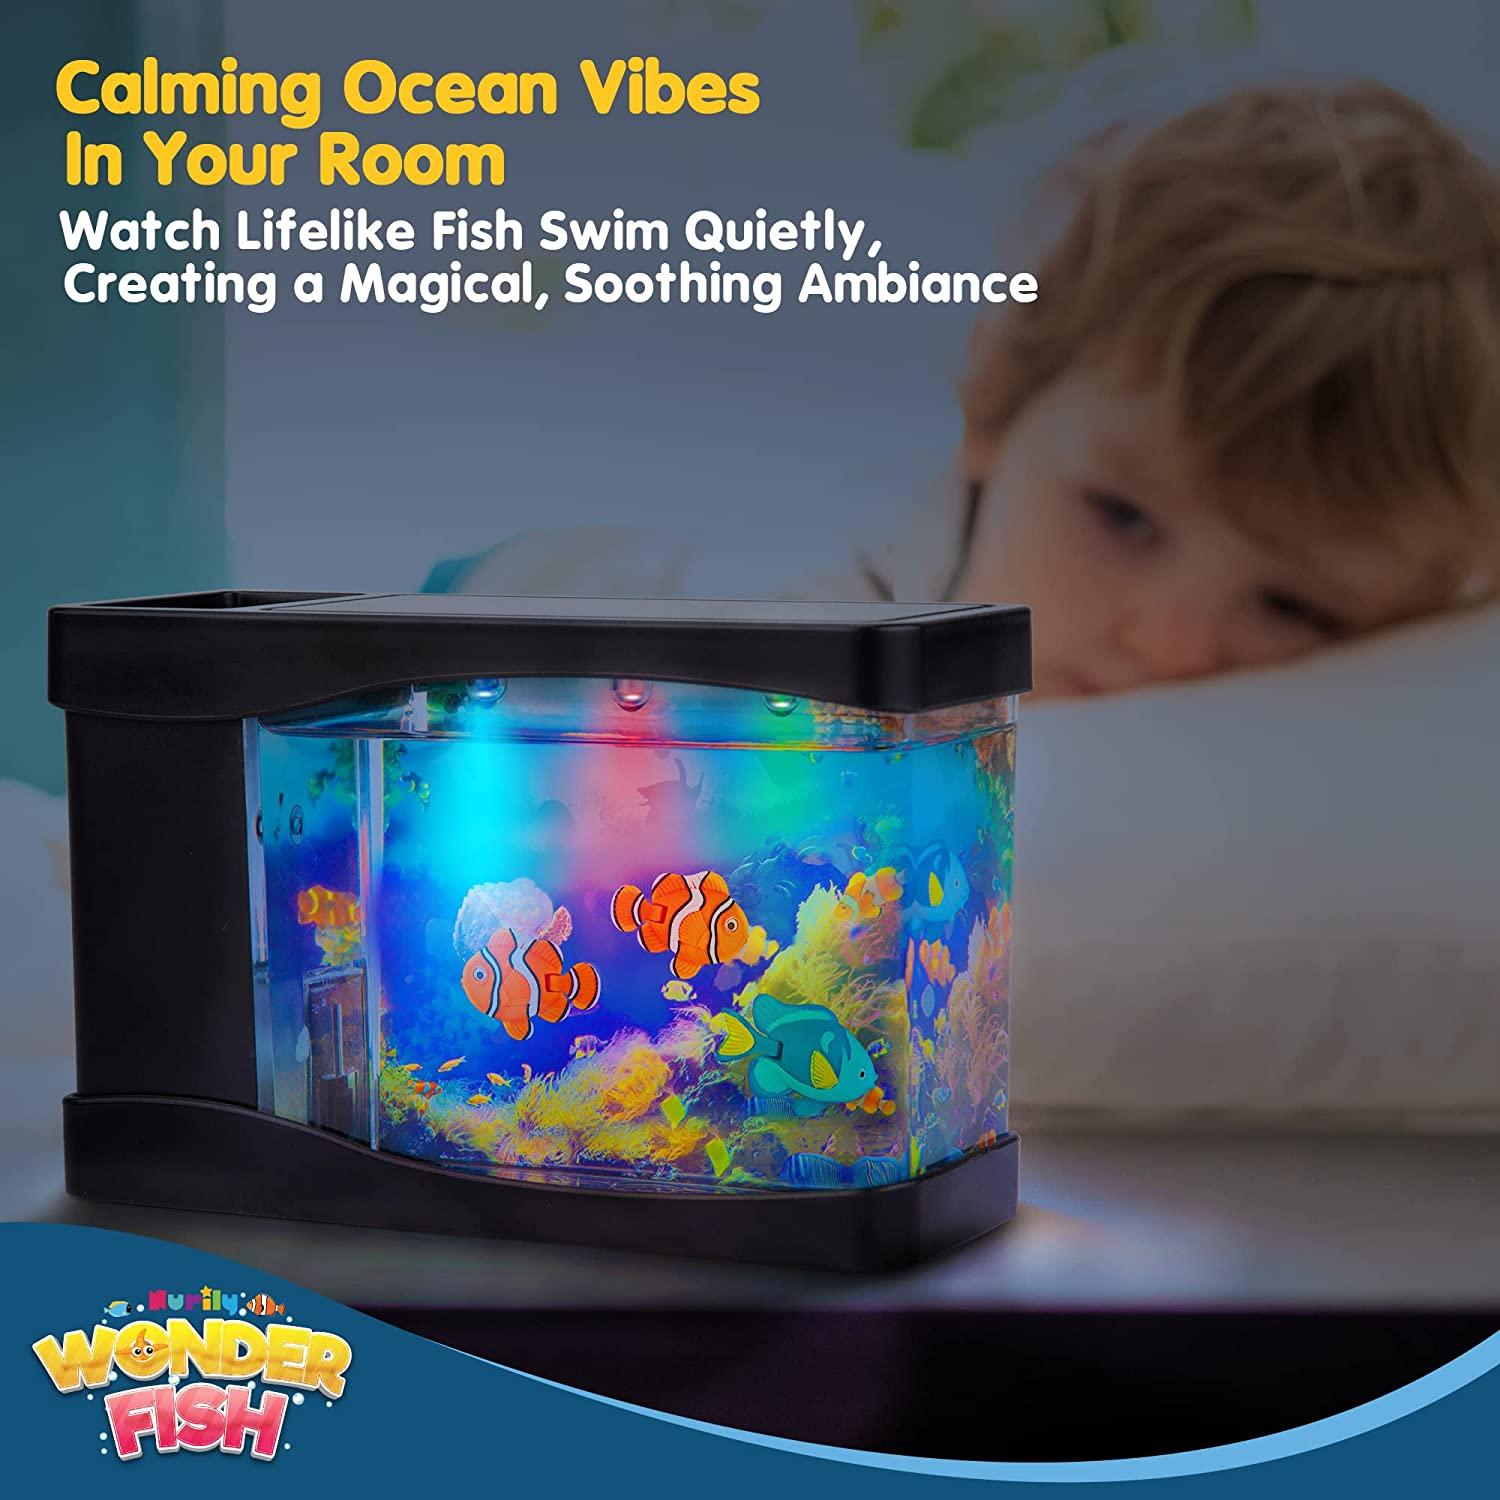 Artificial Fish Tank Virtual Ocean Toy in Motion Lamp - Mini Office Desk  Aquarium 3 Colorful LED Lights, Colorful Aquarium Backgrounds - 3  Artificial Fish, Bubbles Tank with Moving Fish, Gift for Kids